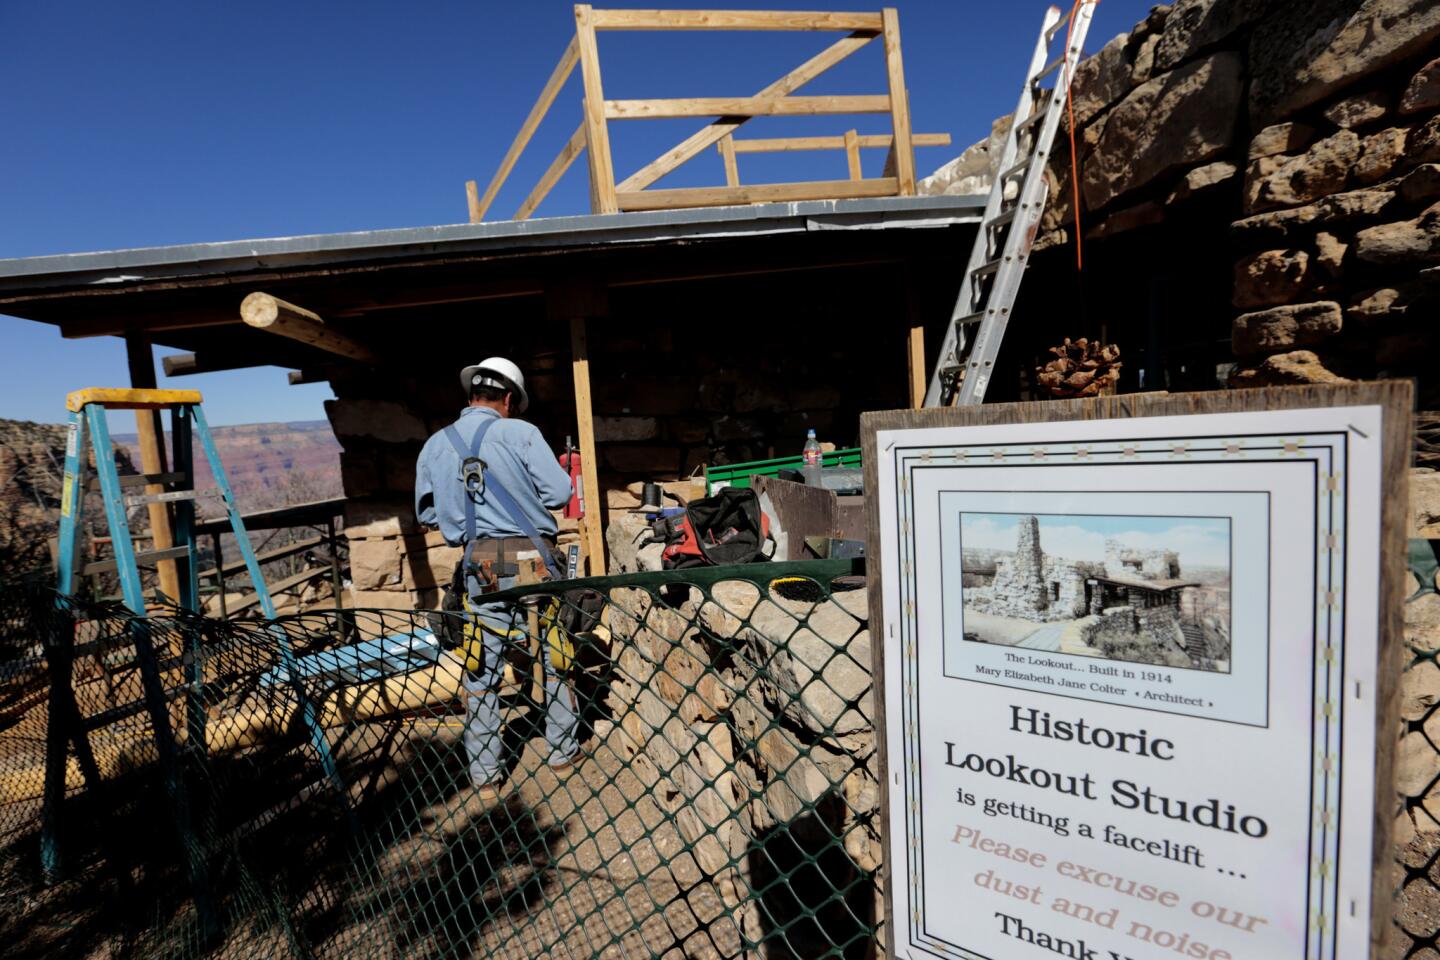 Renovation continues in March 2015 at the historic Lookout Studio in the Grand Canyon, where several structures are being restored and refurbished.